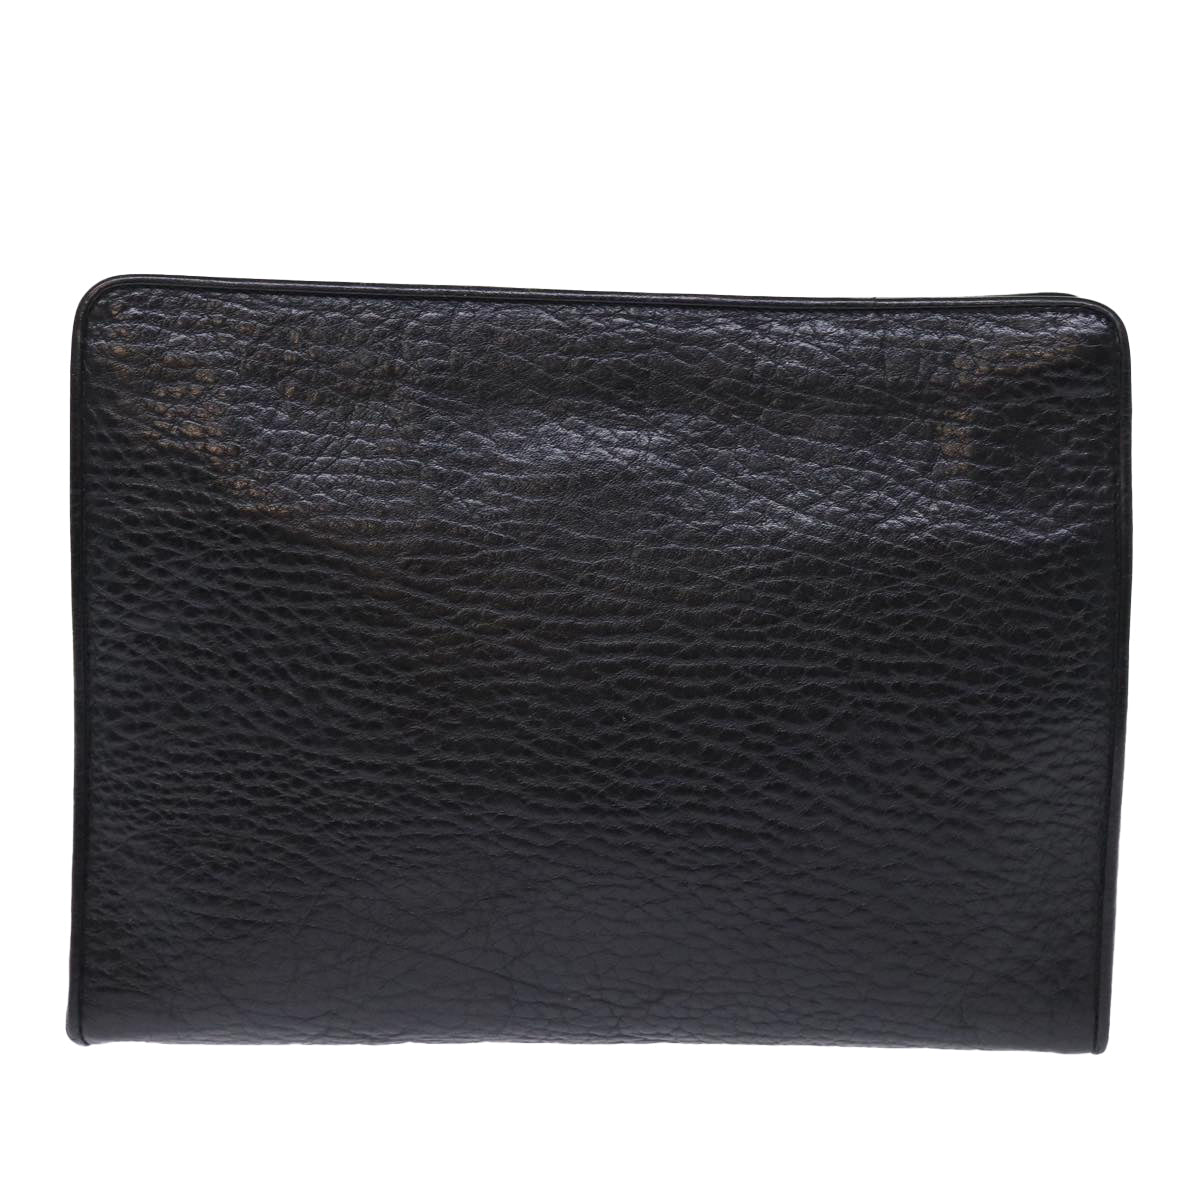 Burberrys Clutch Bag Leather Black Auth bs14320 - 0